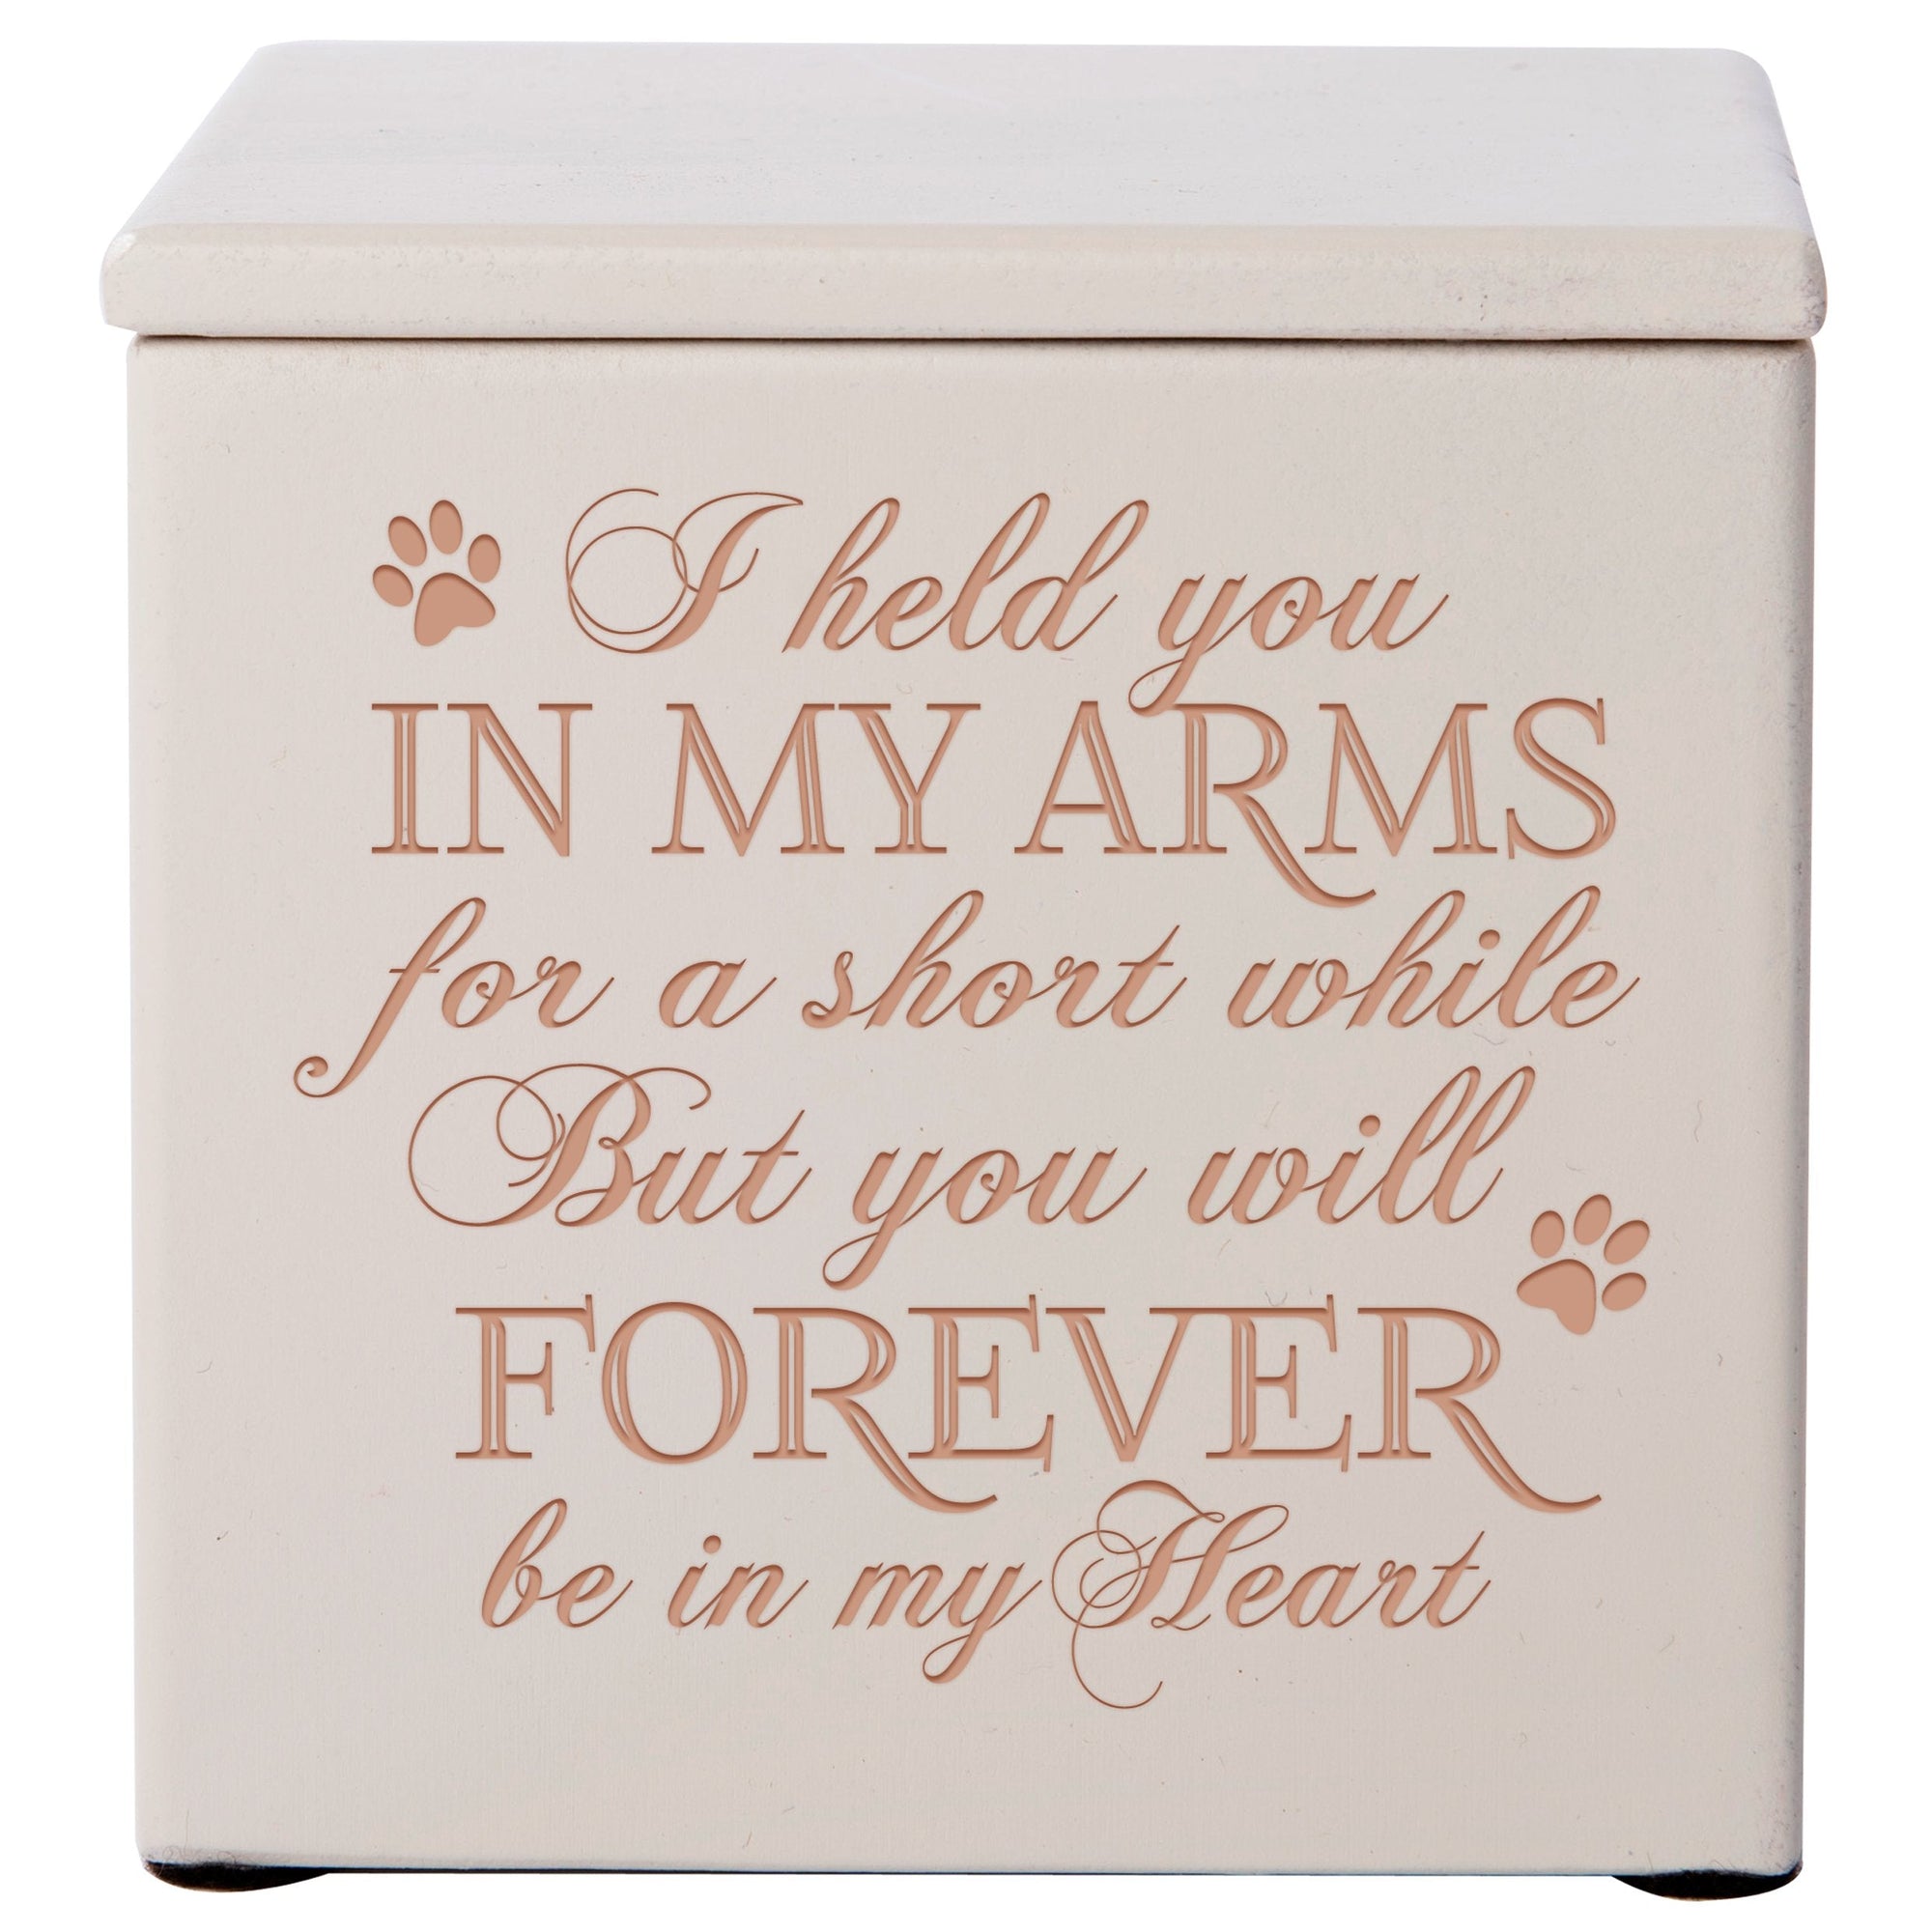 Ivory Pet Memorial 3.5x3.5 Keepsake Urn with phrase "I Held You In My Arms"